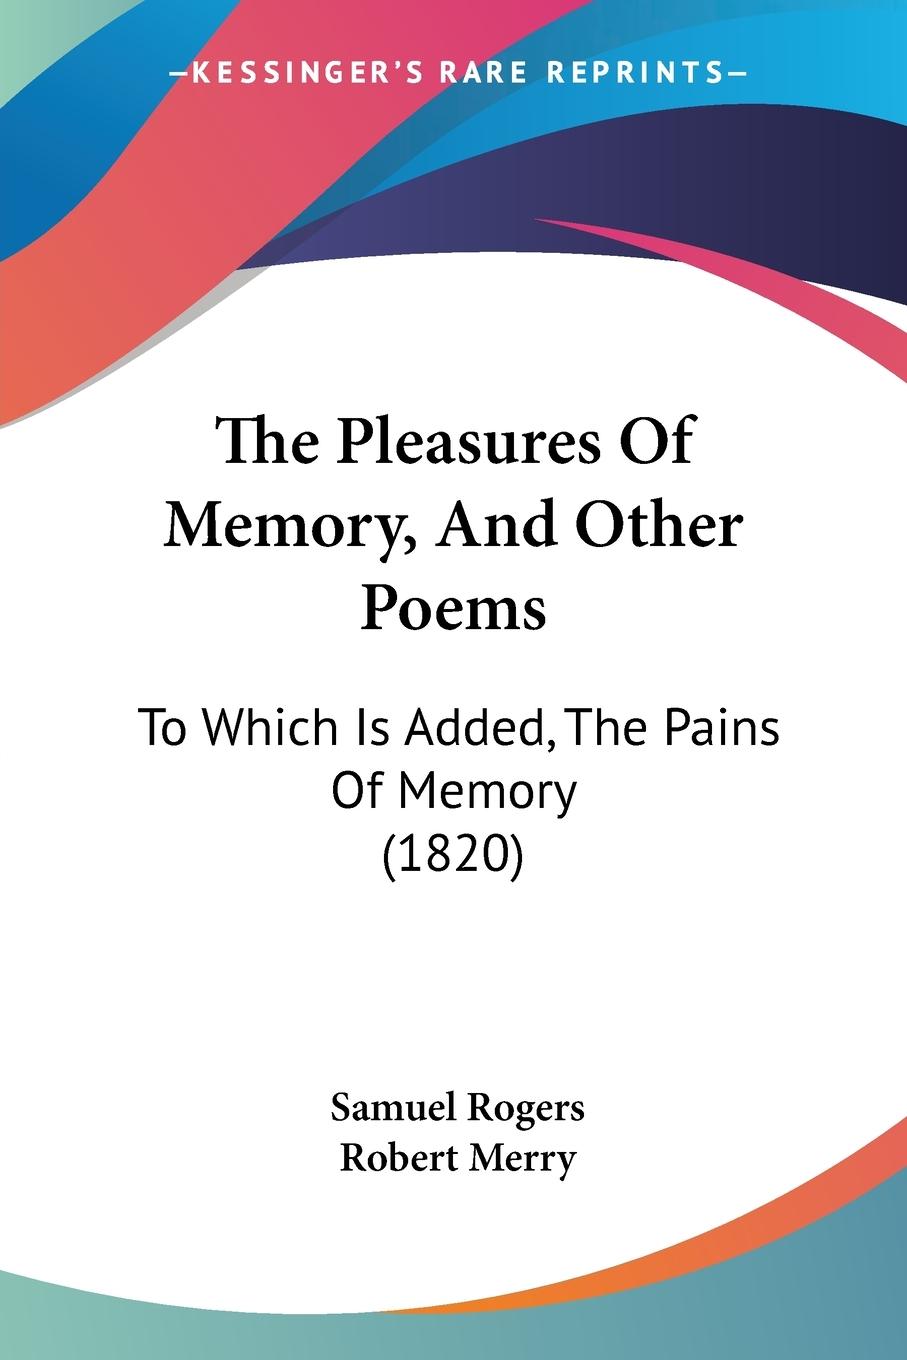 The Pleasures Of Memory, And Other Poems - Rogers, Samuel Merry, Robert